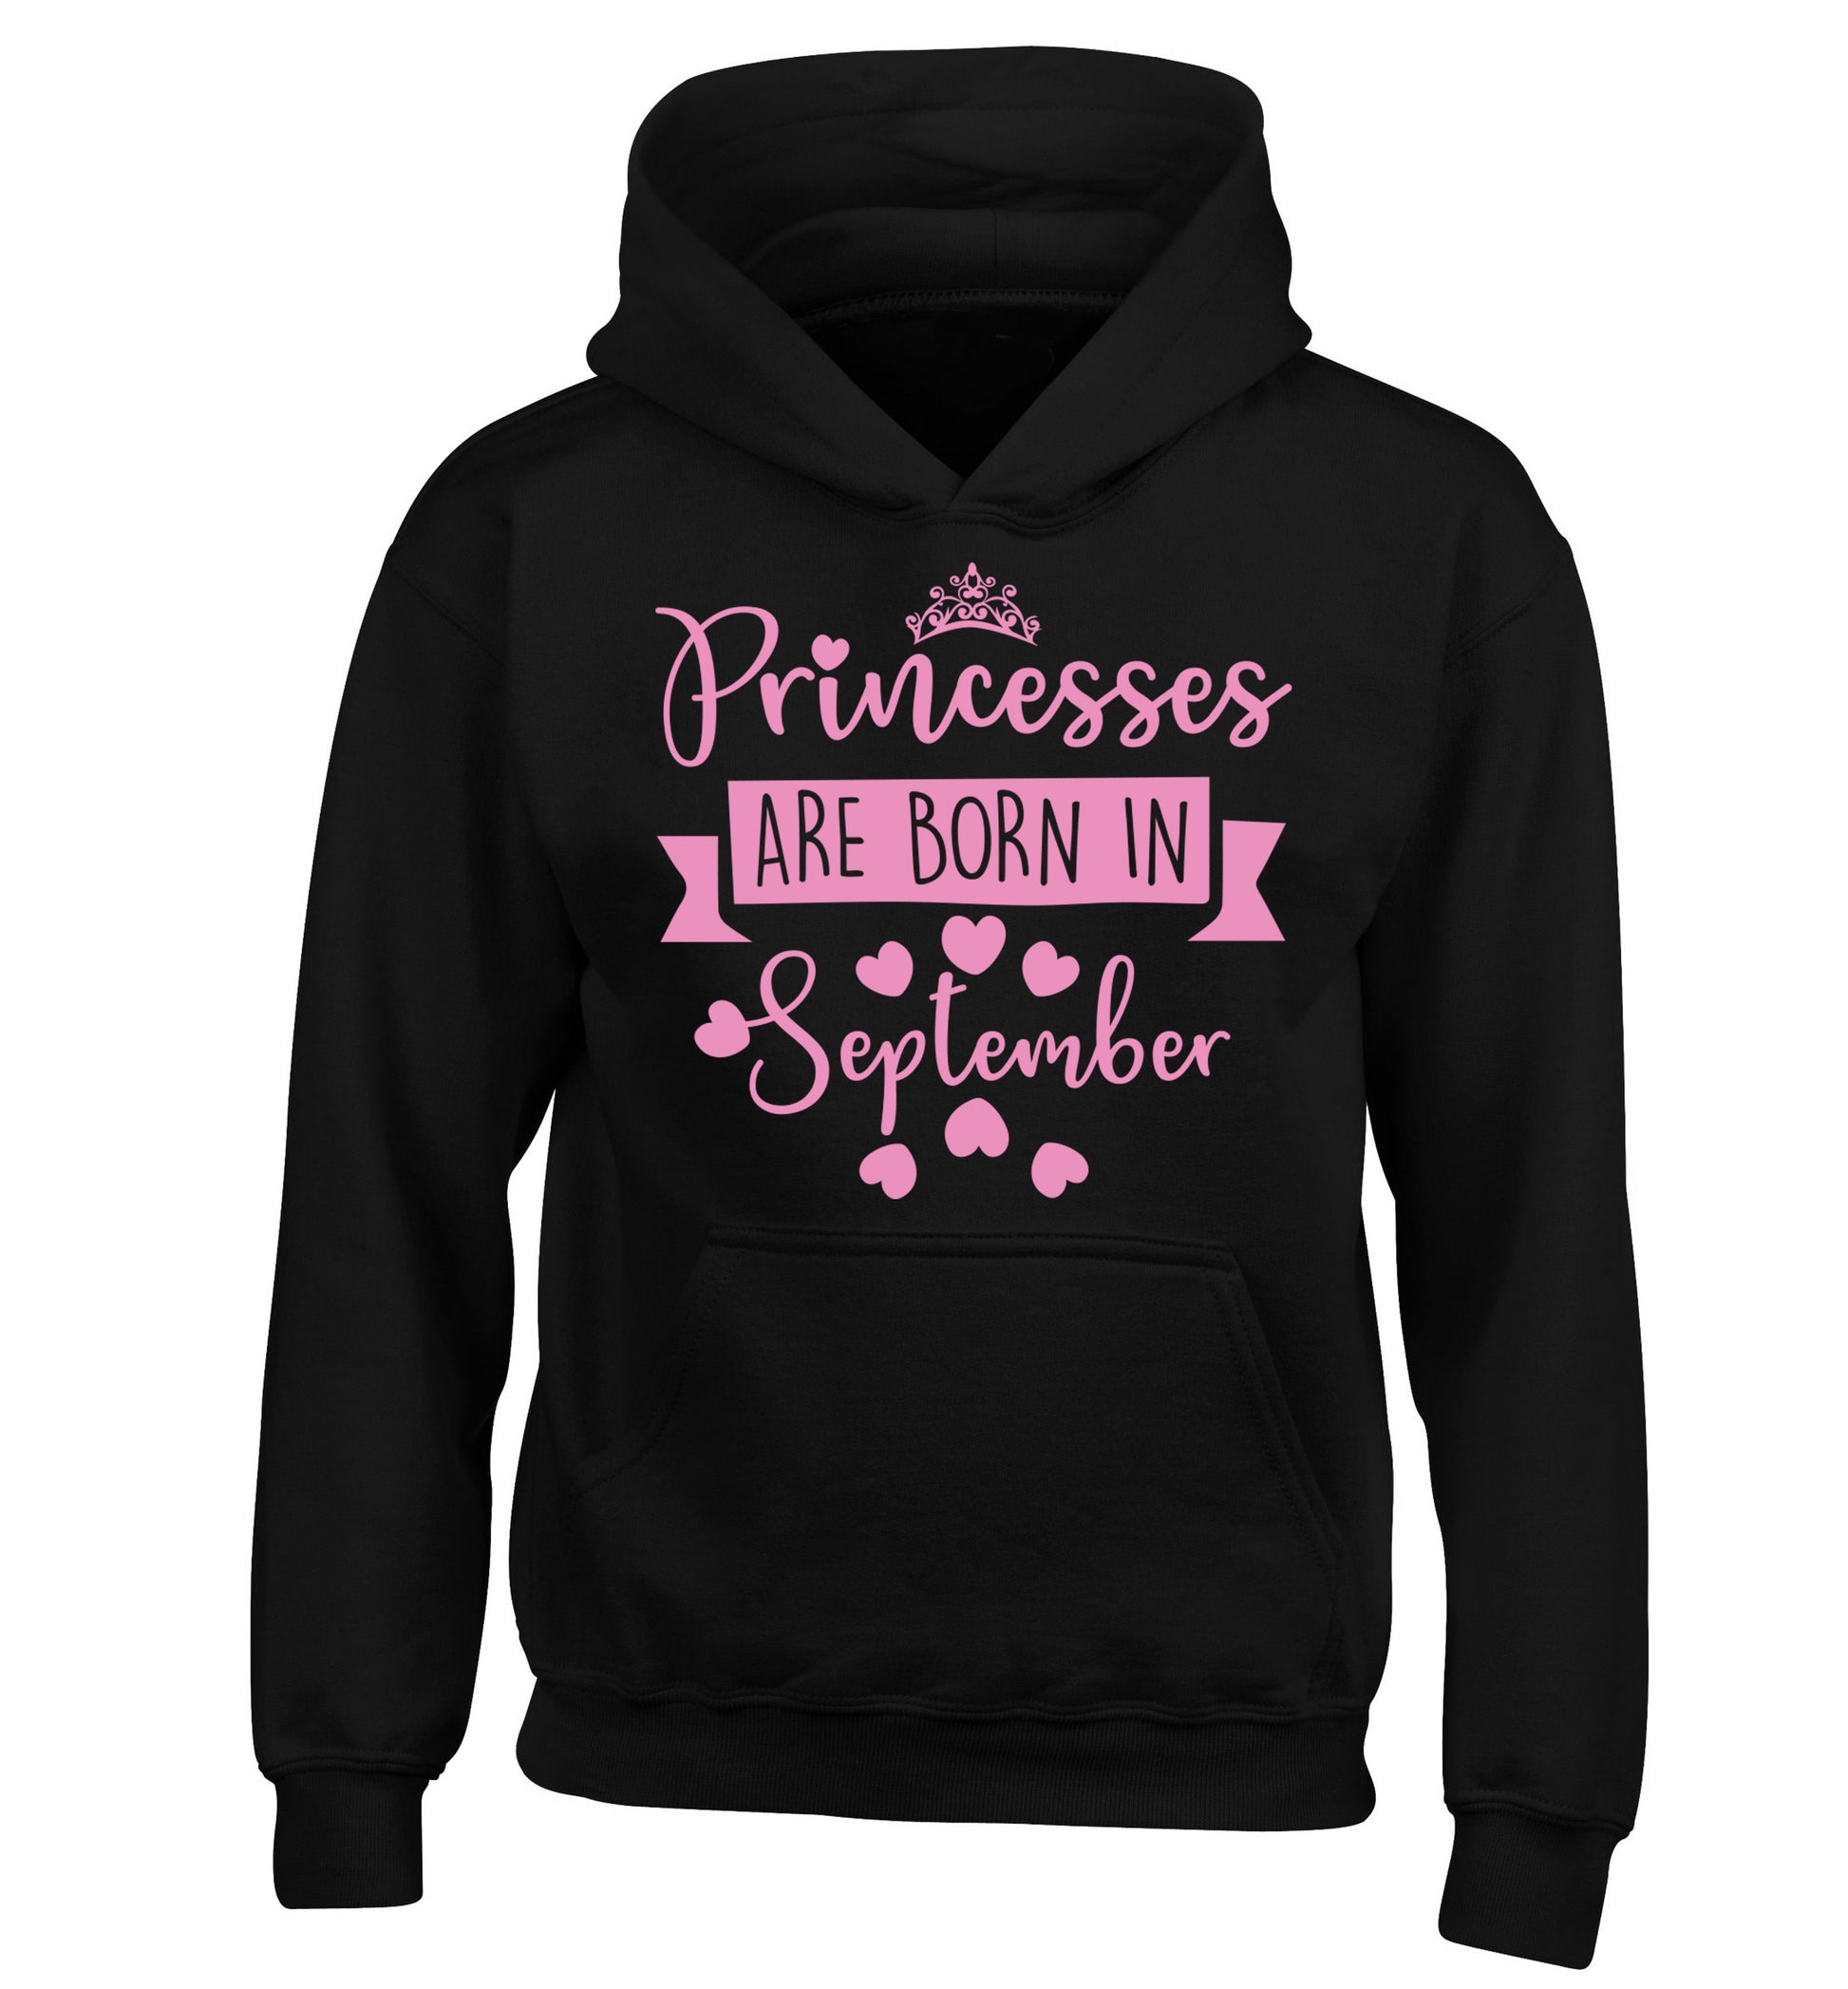 Princesses are born in September children's black hoodie 12-13 Years